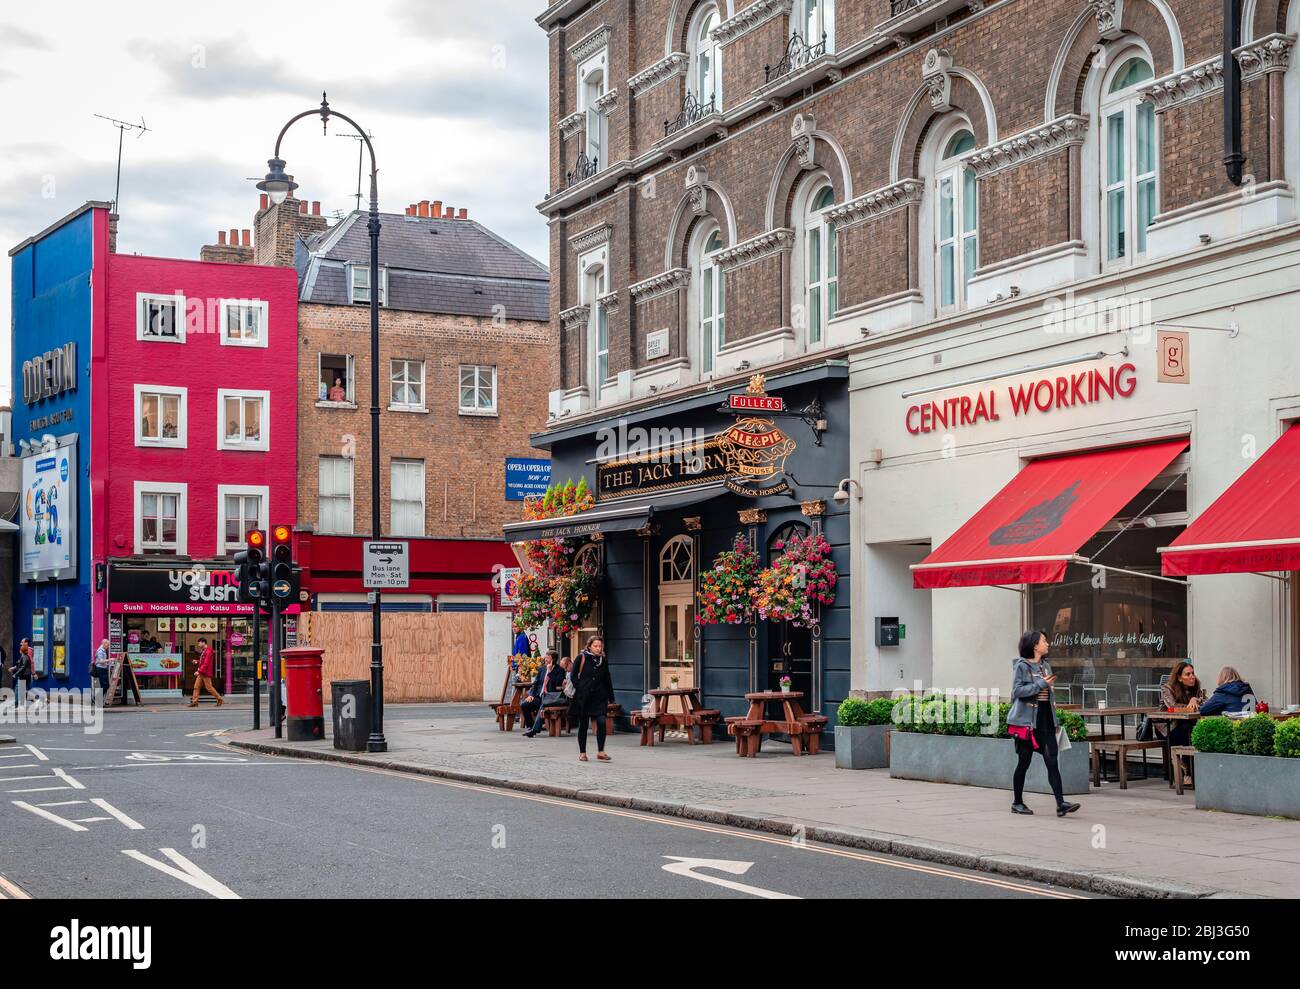 London / UK - September 9 2015: The junction of Bayley st. and Tottenham Court Road, with restaurants, pubs and cinemas Stock Photo